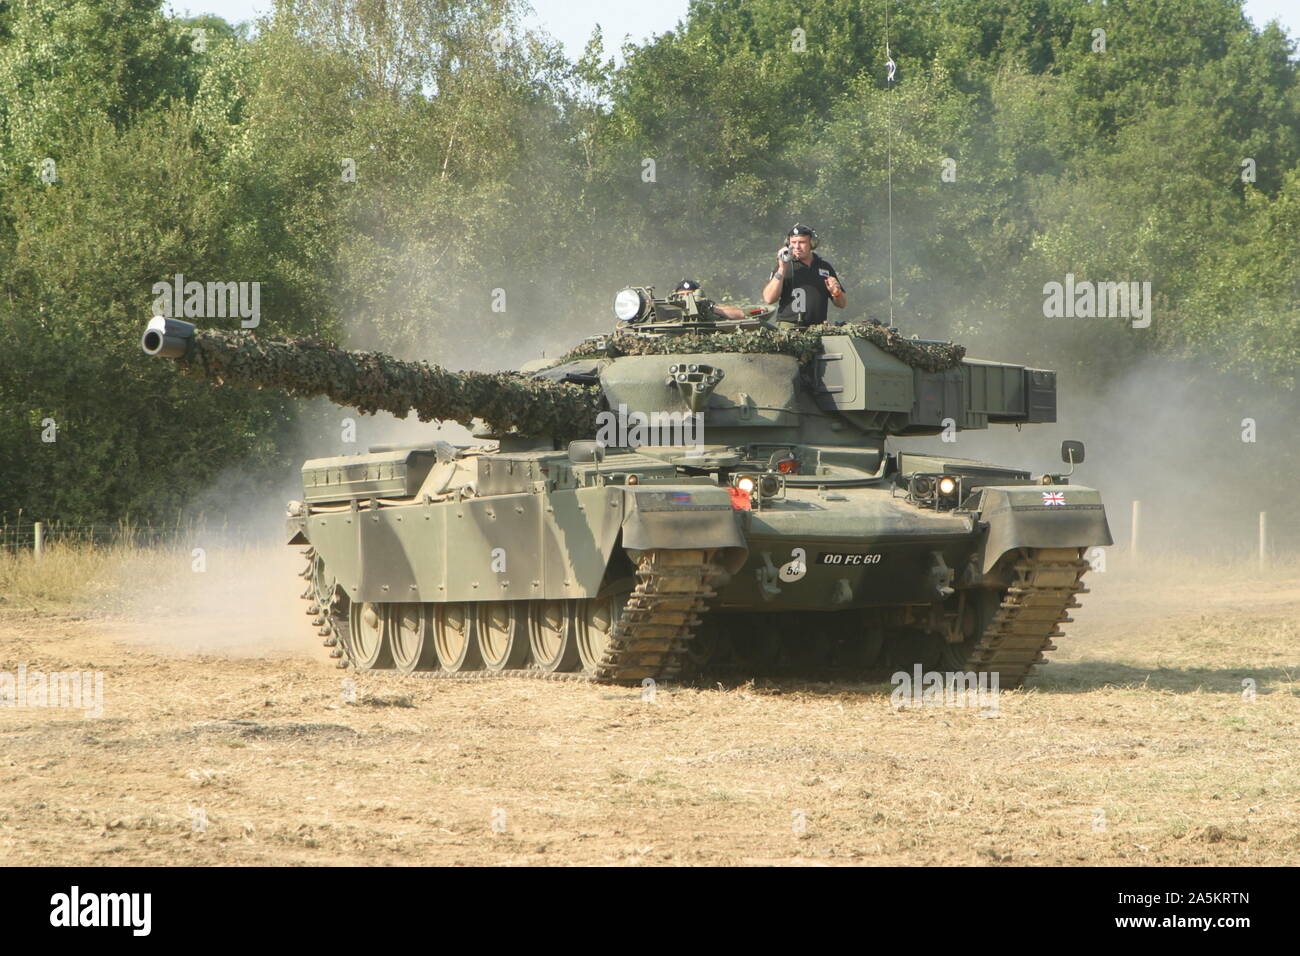 The Chieftain was the British Army’s Main Battle Tank during the Cold War. The tank entered service in 1967. Stock Photo